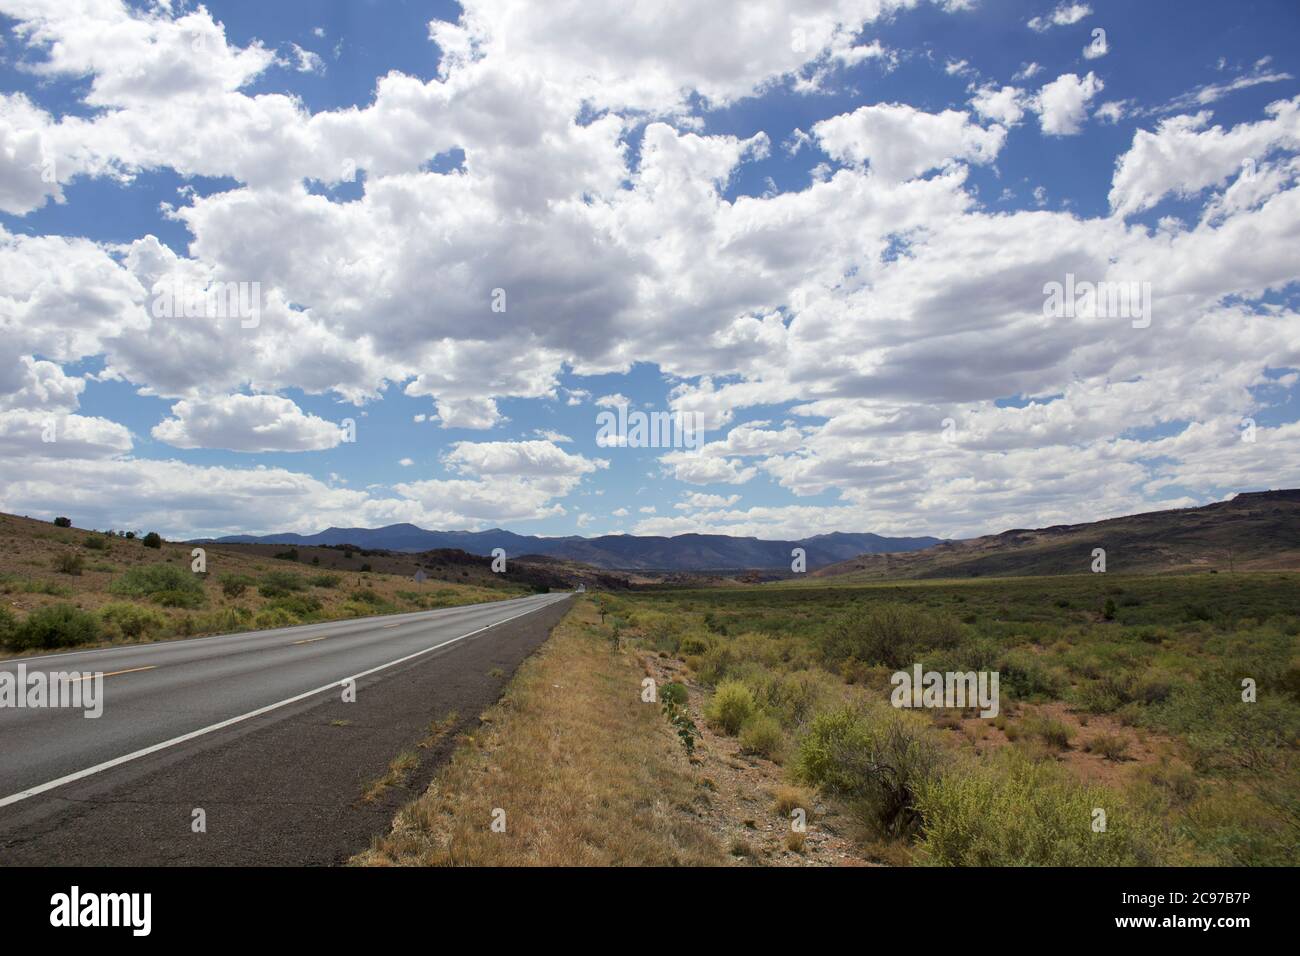 Scenic drive along central New Mexico's San Mateo Mountains Stock Photo